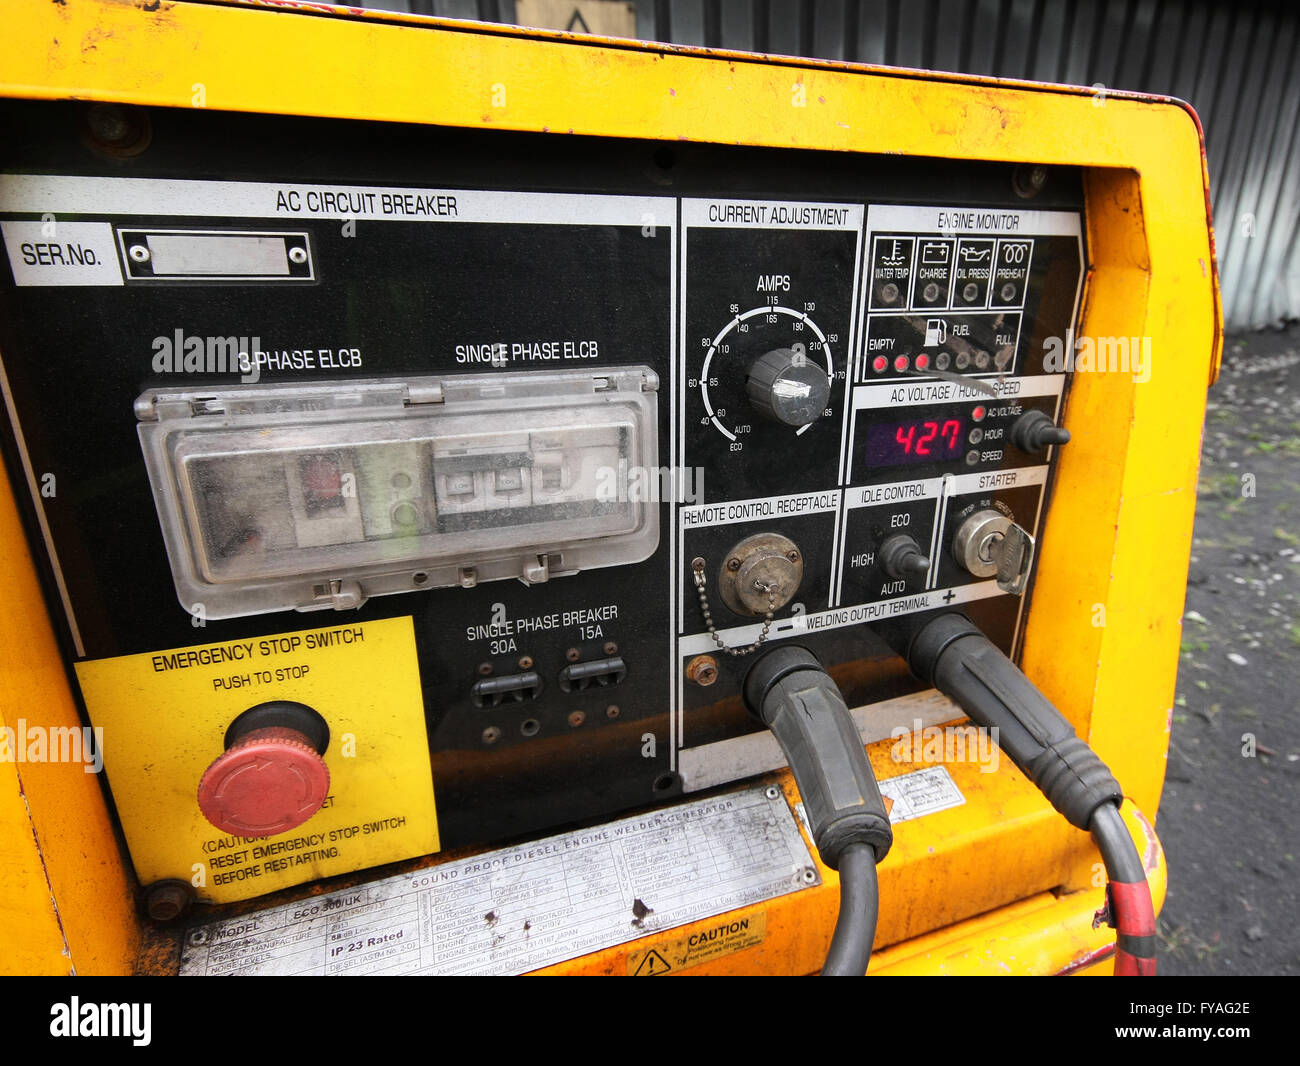 Section of control panel for mobile electric welding unit. Stock Photo